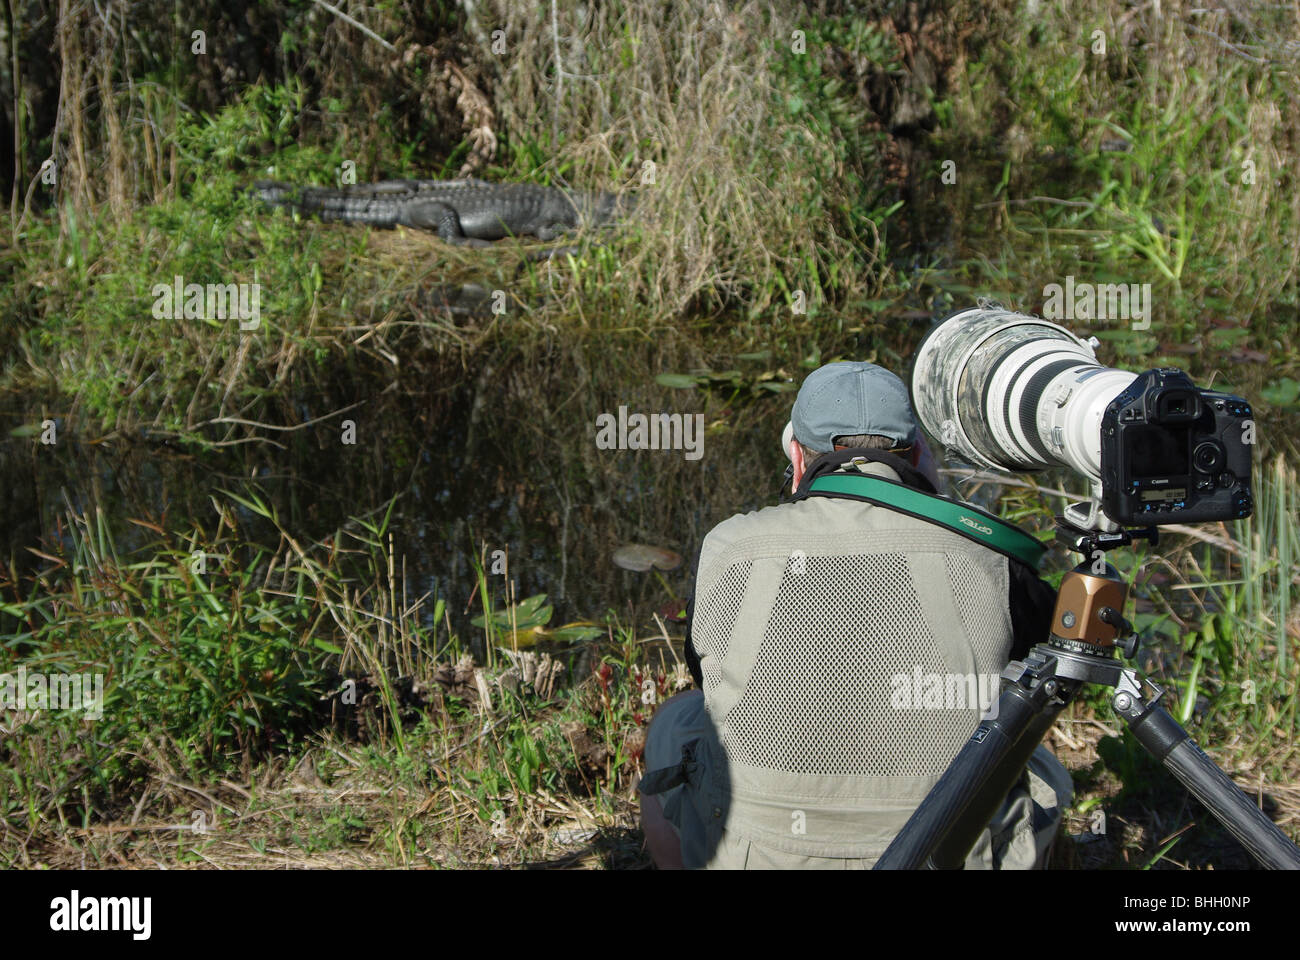 Nature photographer, taking pictures of an alligator in Everglades National Park; Canon Mark camera with long lens on a tripod is in foreground. Stock Photo